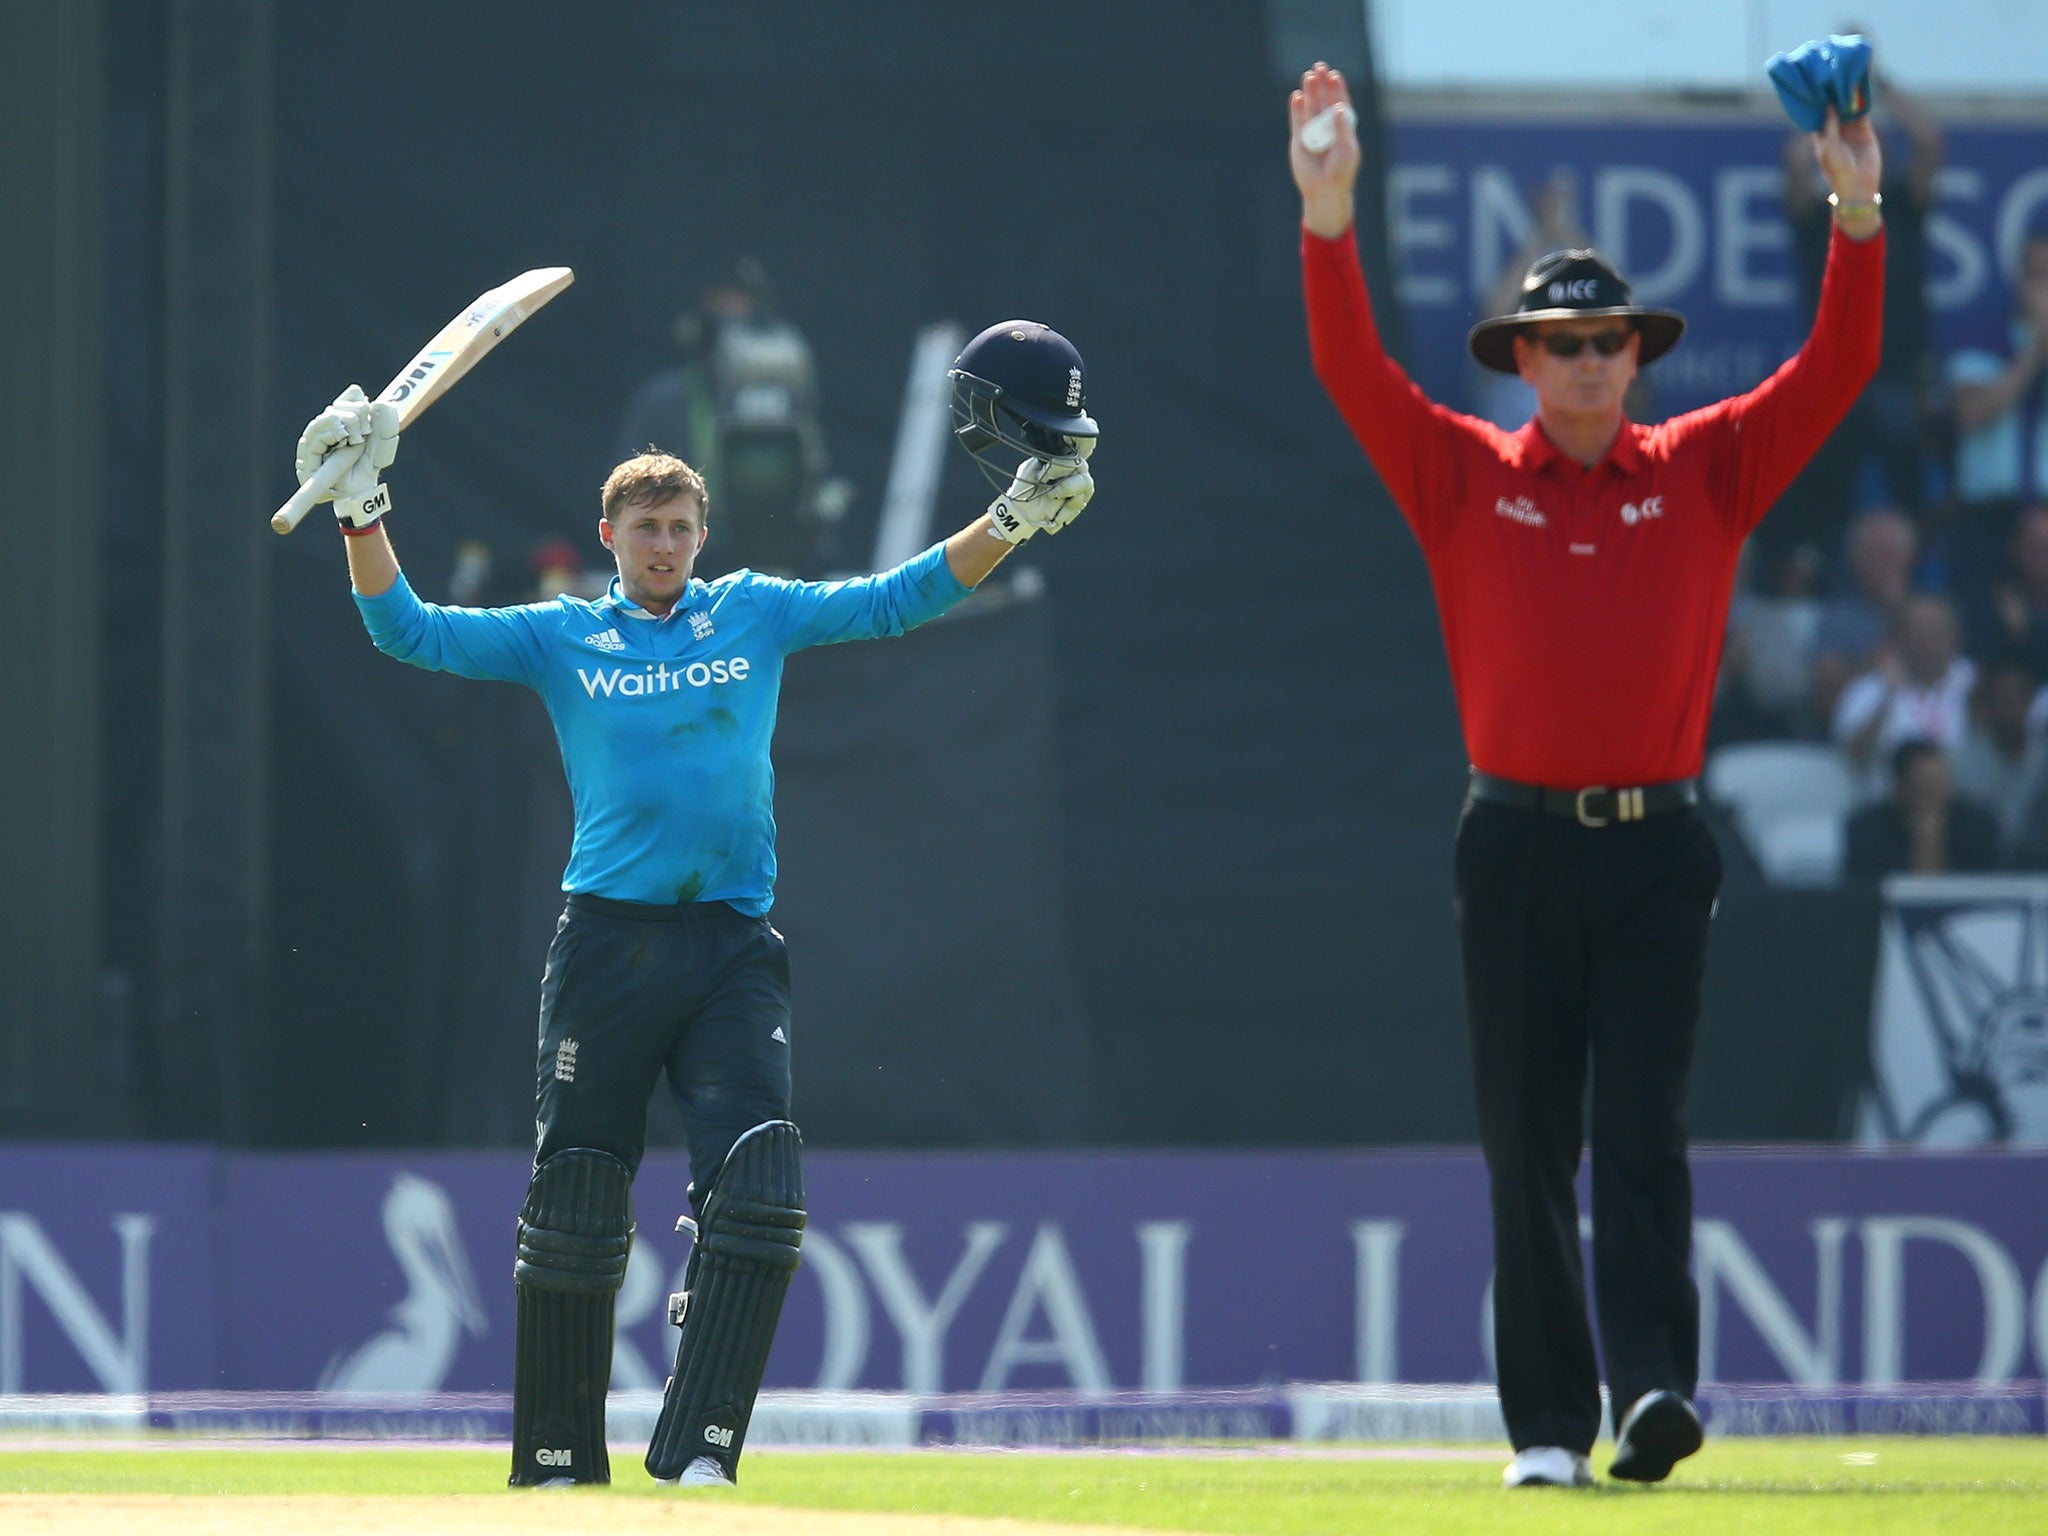 Joe Root powered England to 294 in the final ODI against India